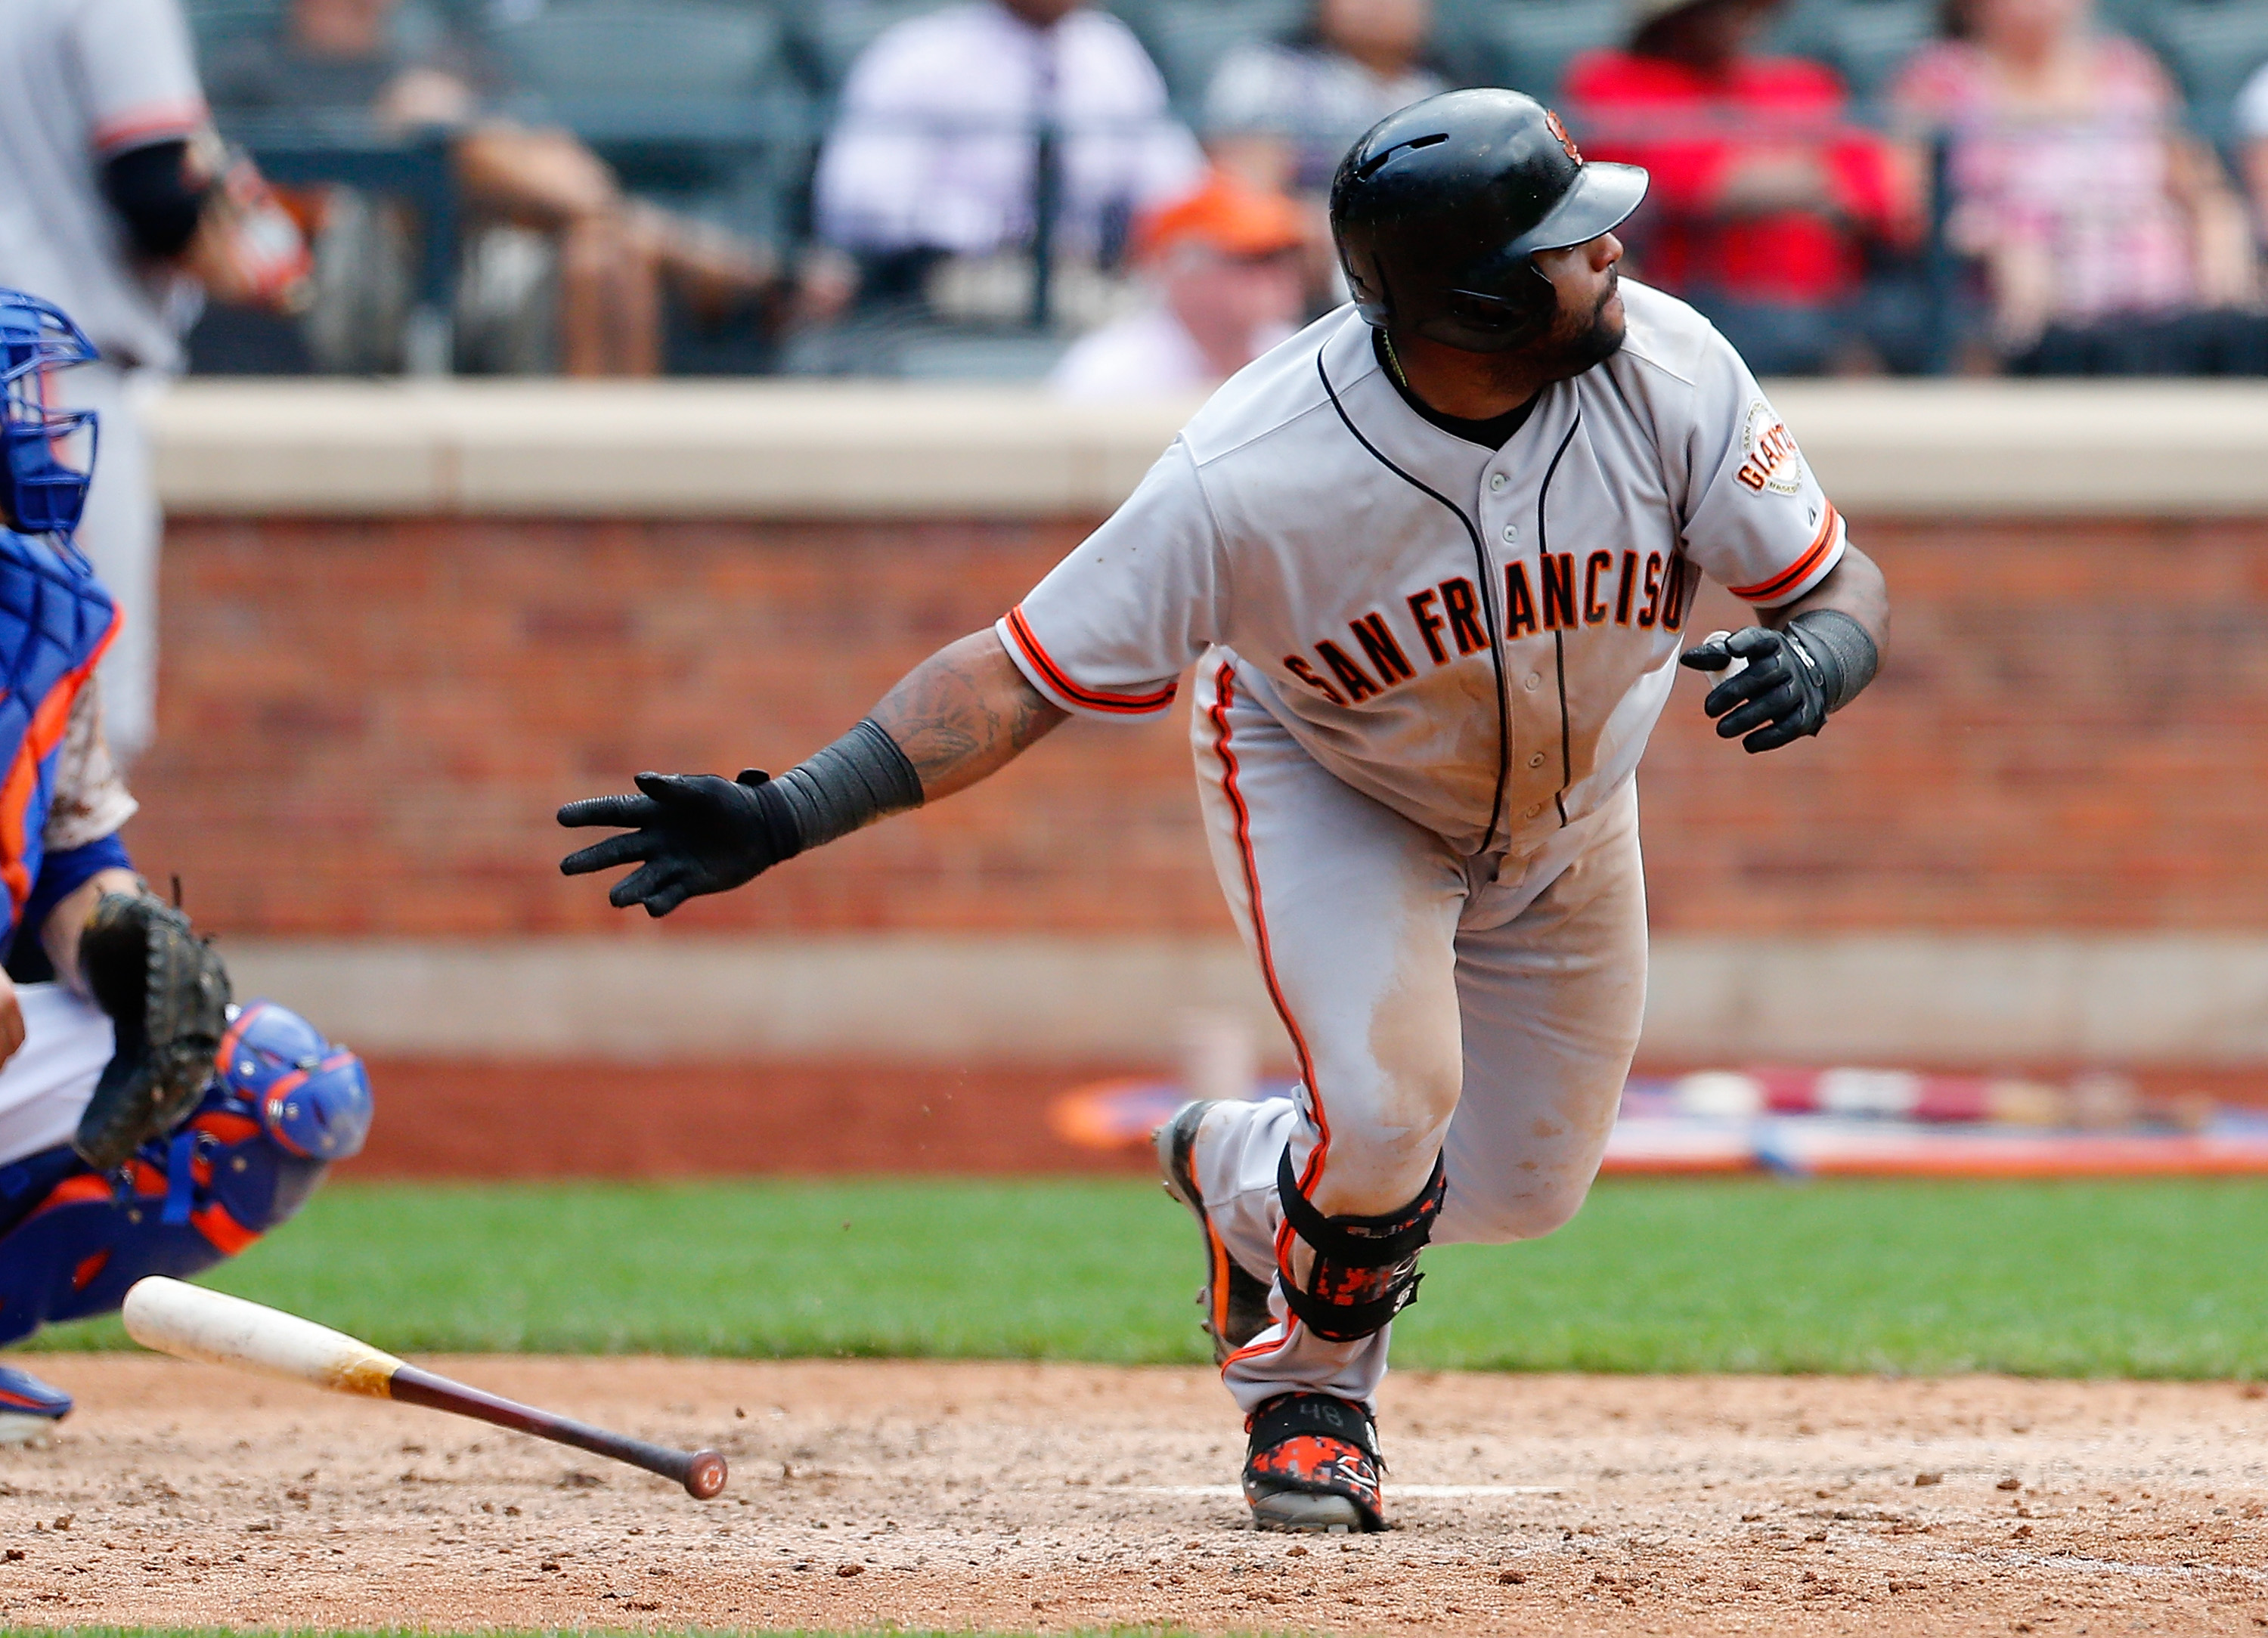 NEW YORK, NY - AUGUST 04: Pablo Sandoval #48 of the San Francisco Giants hits a RBI sngle in the ninth inning to break a 3-3 tie against the New York Mets at Citi Field on August 4, 2014 in the Flushing neighborhood of the Queens borough of New York City.  (Photo by Mike Stobe/Getty Images)